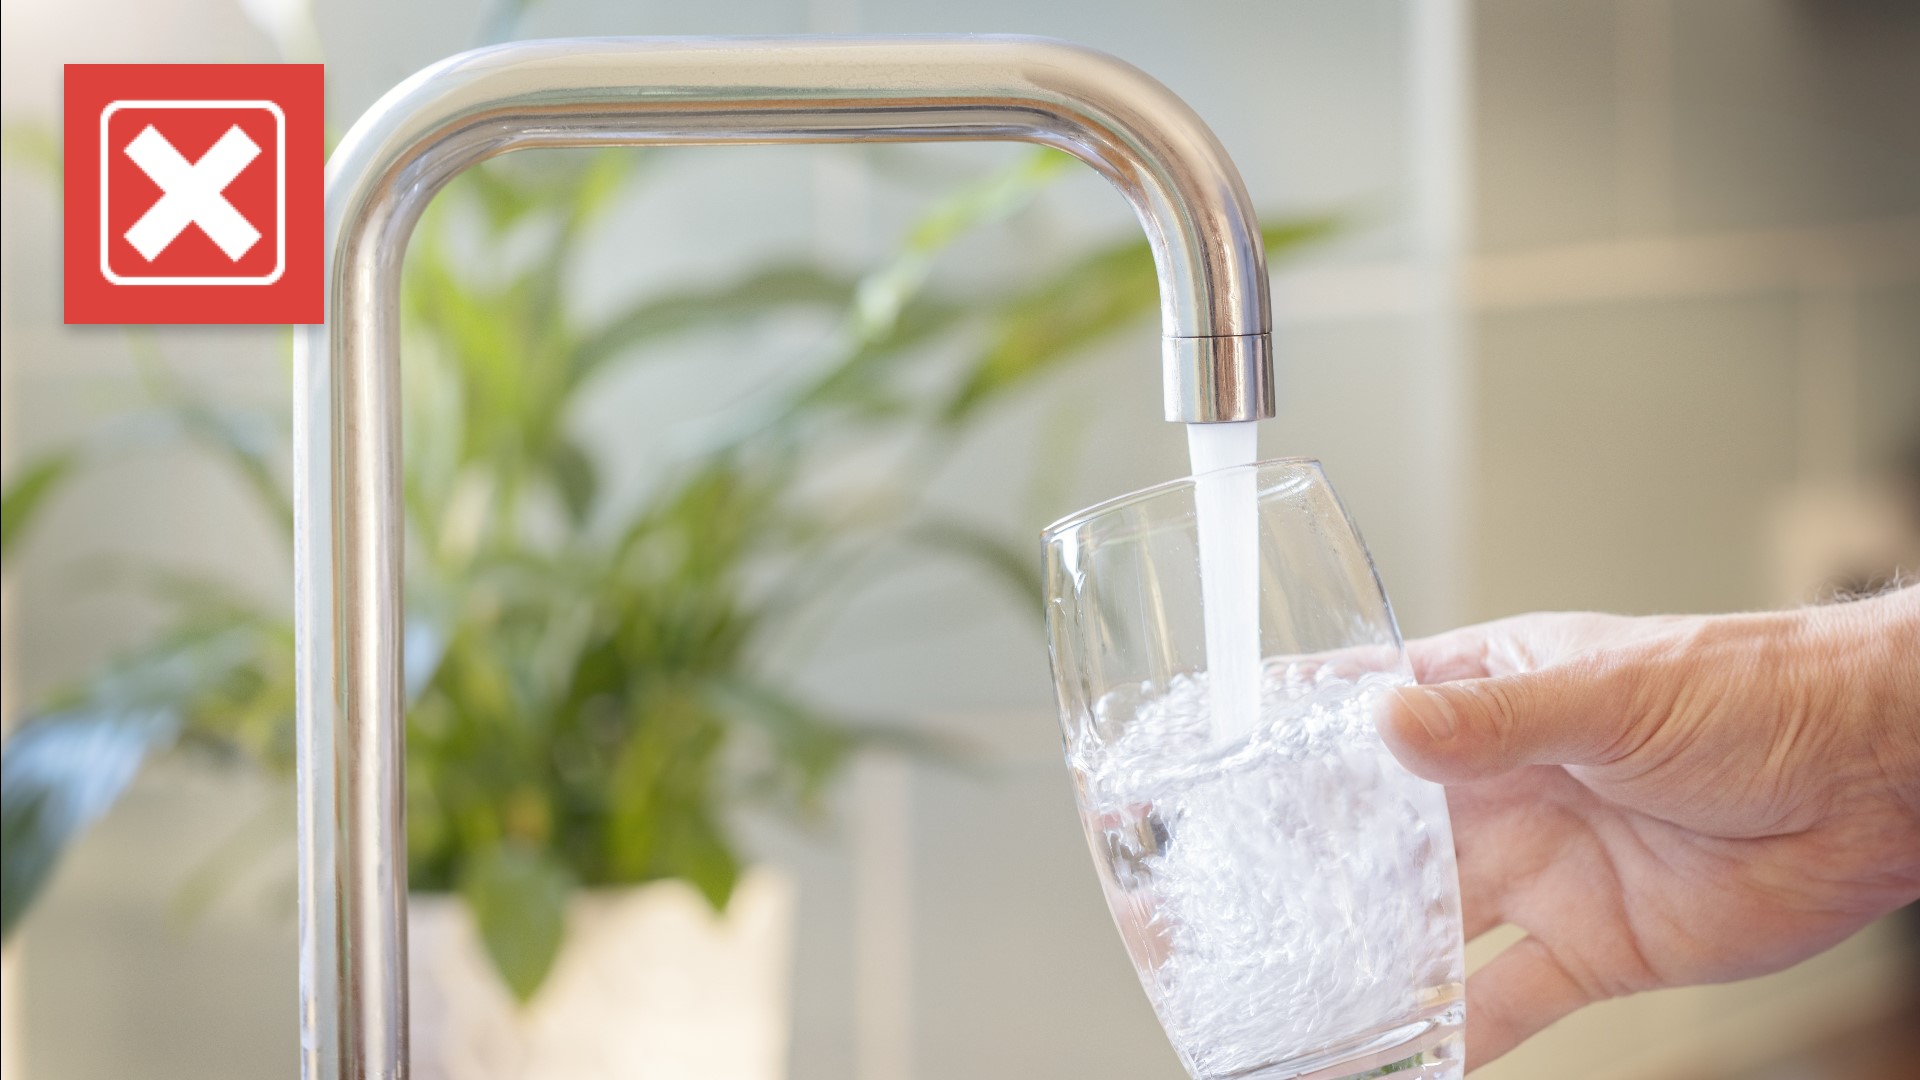 Experts said drinking water goes through a multi-barrier treatment approach that is effective at removing and killing viruses.